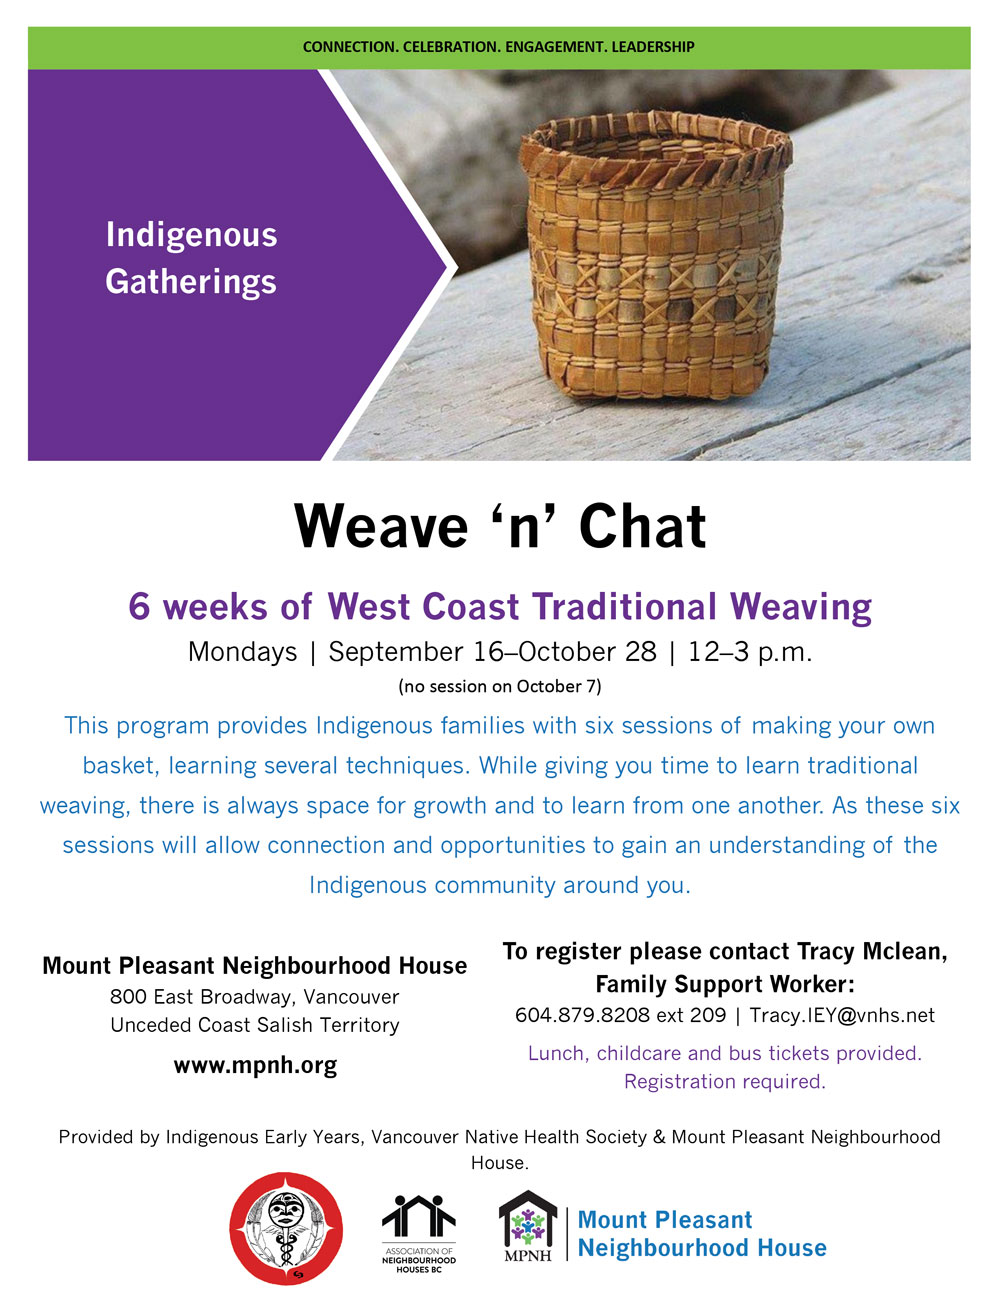 An image of the poster with event details, featuring a photo of a West Coast woven basket.